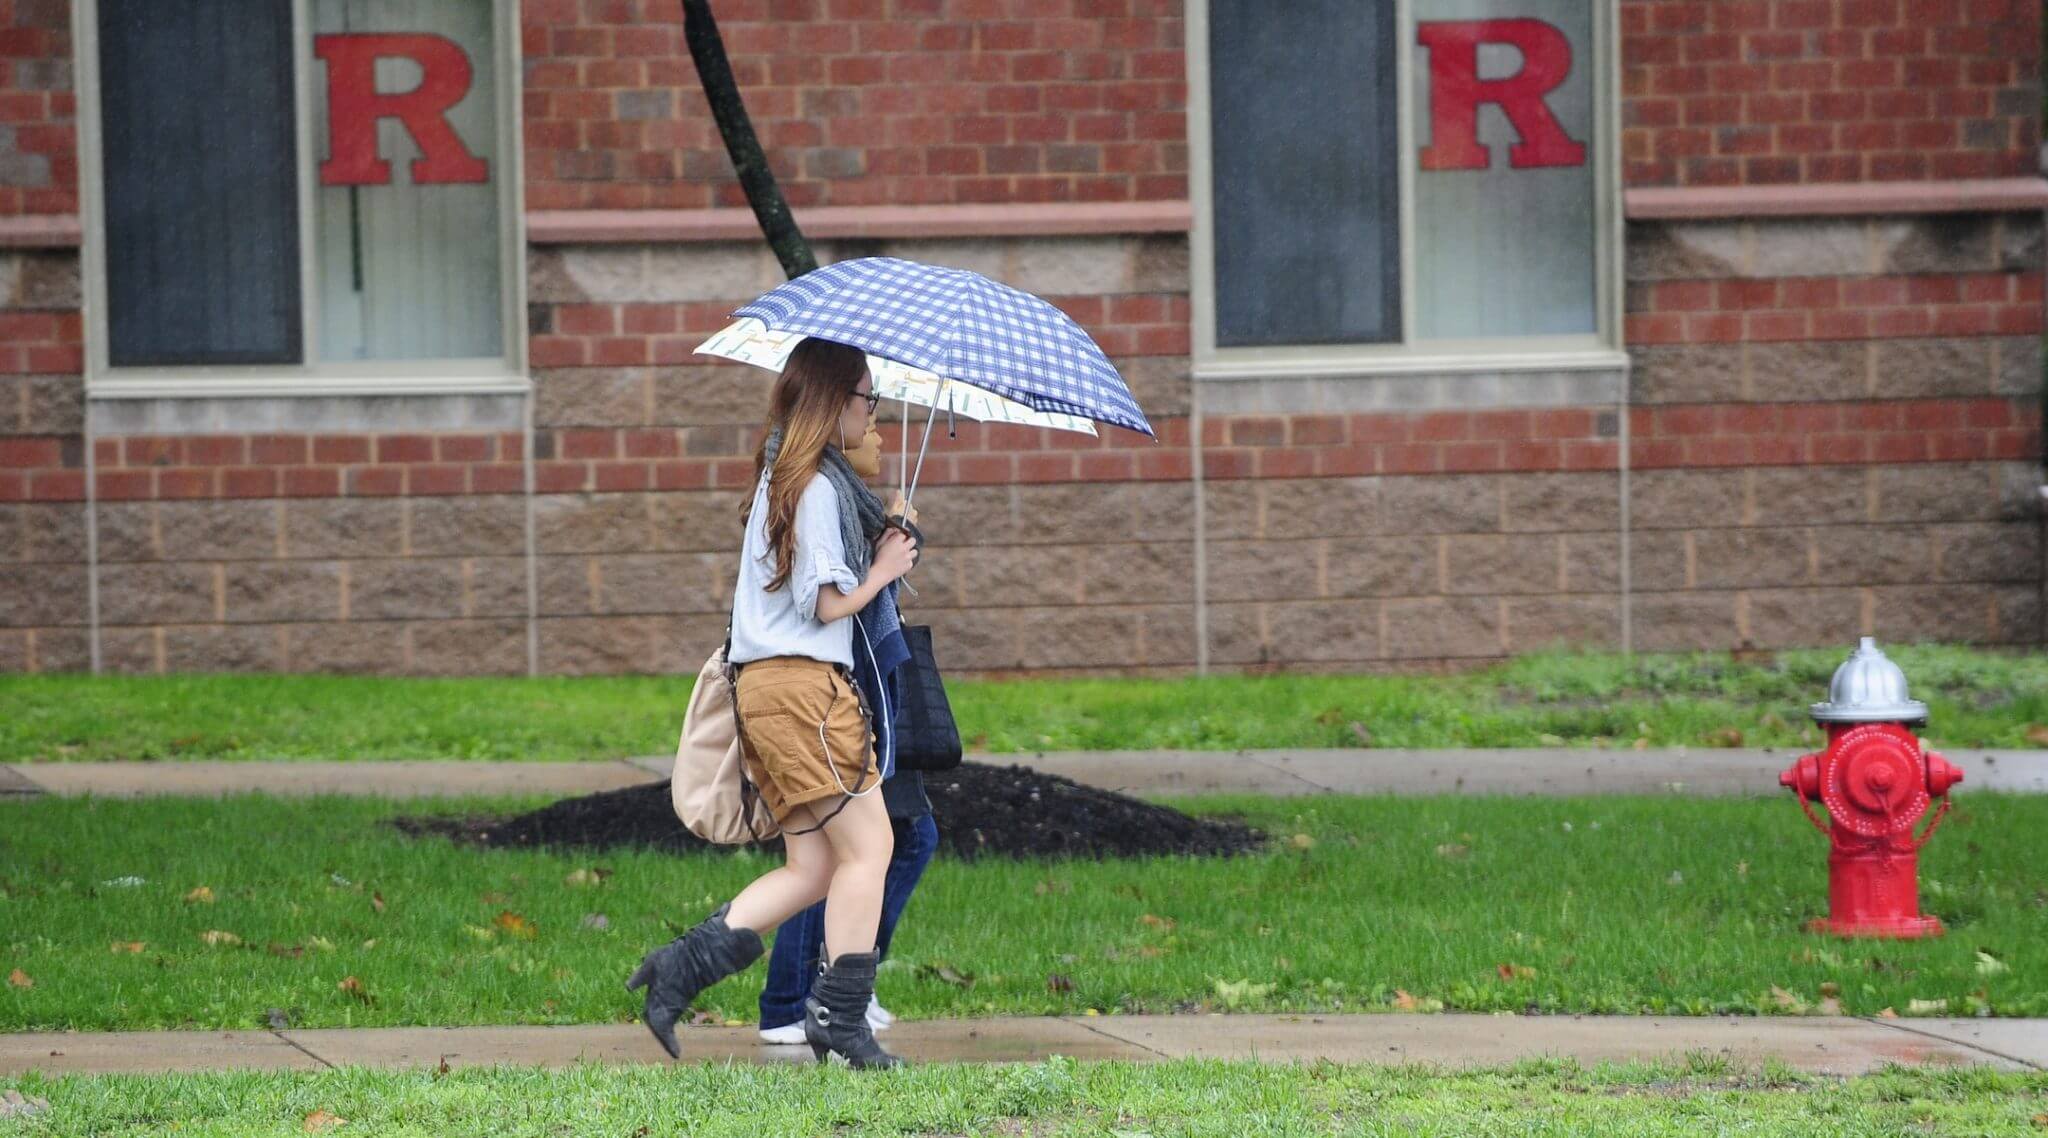 A student walks past the dormitory at Rutgers Univeristy in New Brunswick, New Jersey on October 1, 2010.